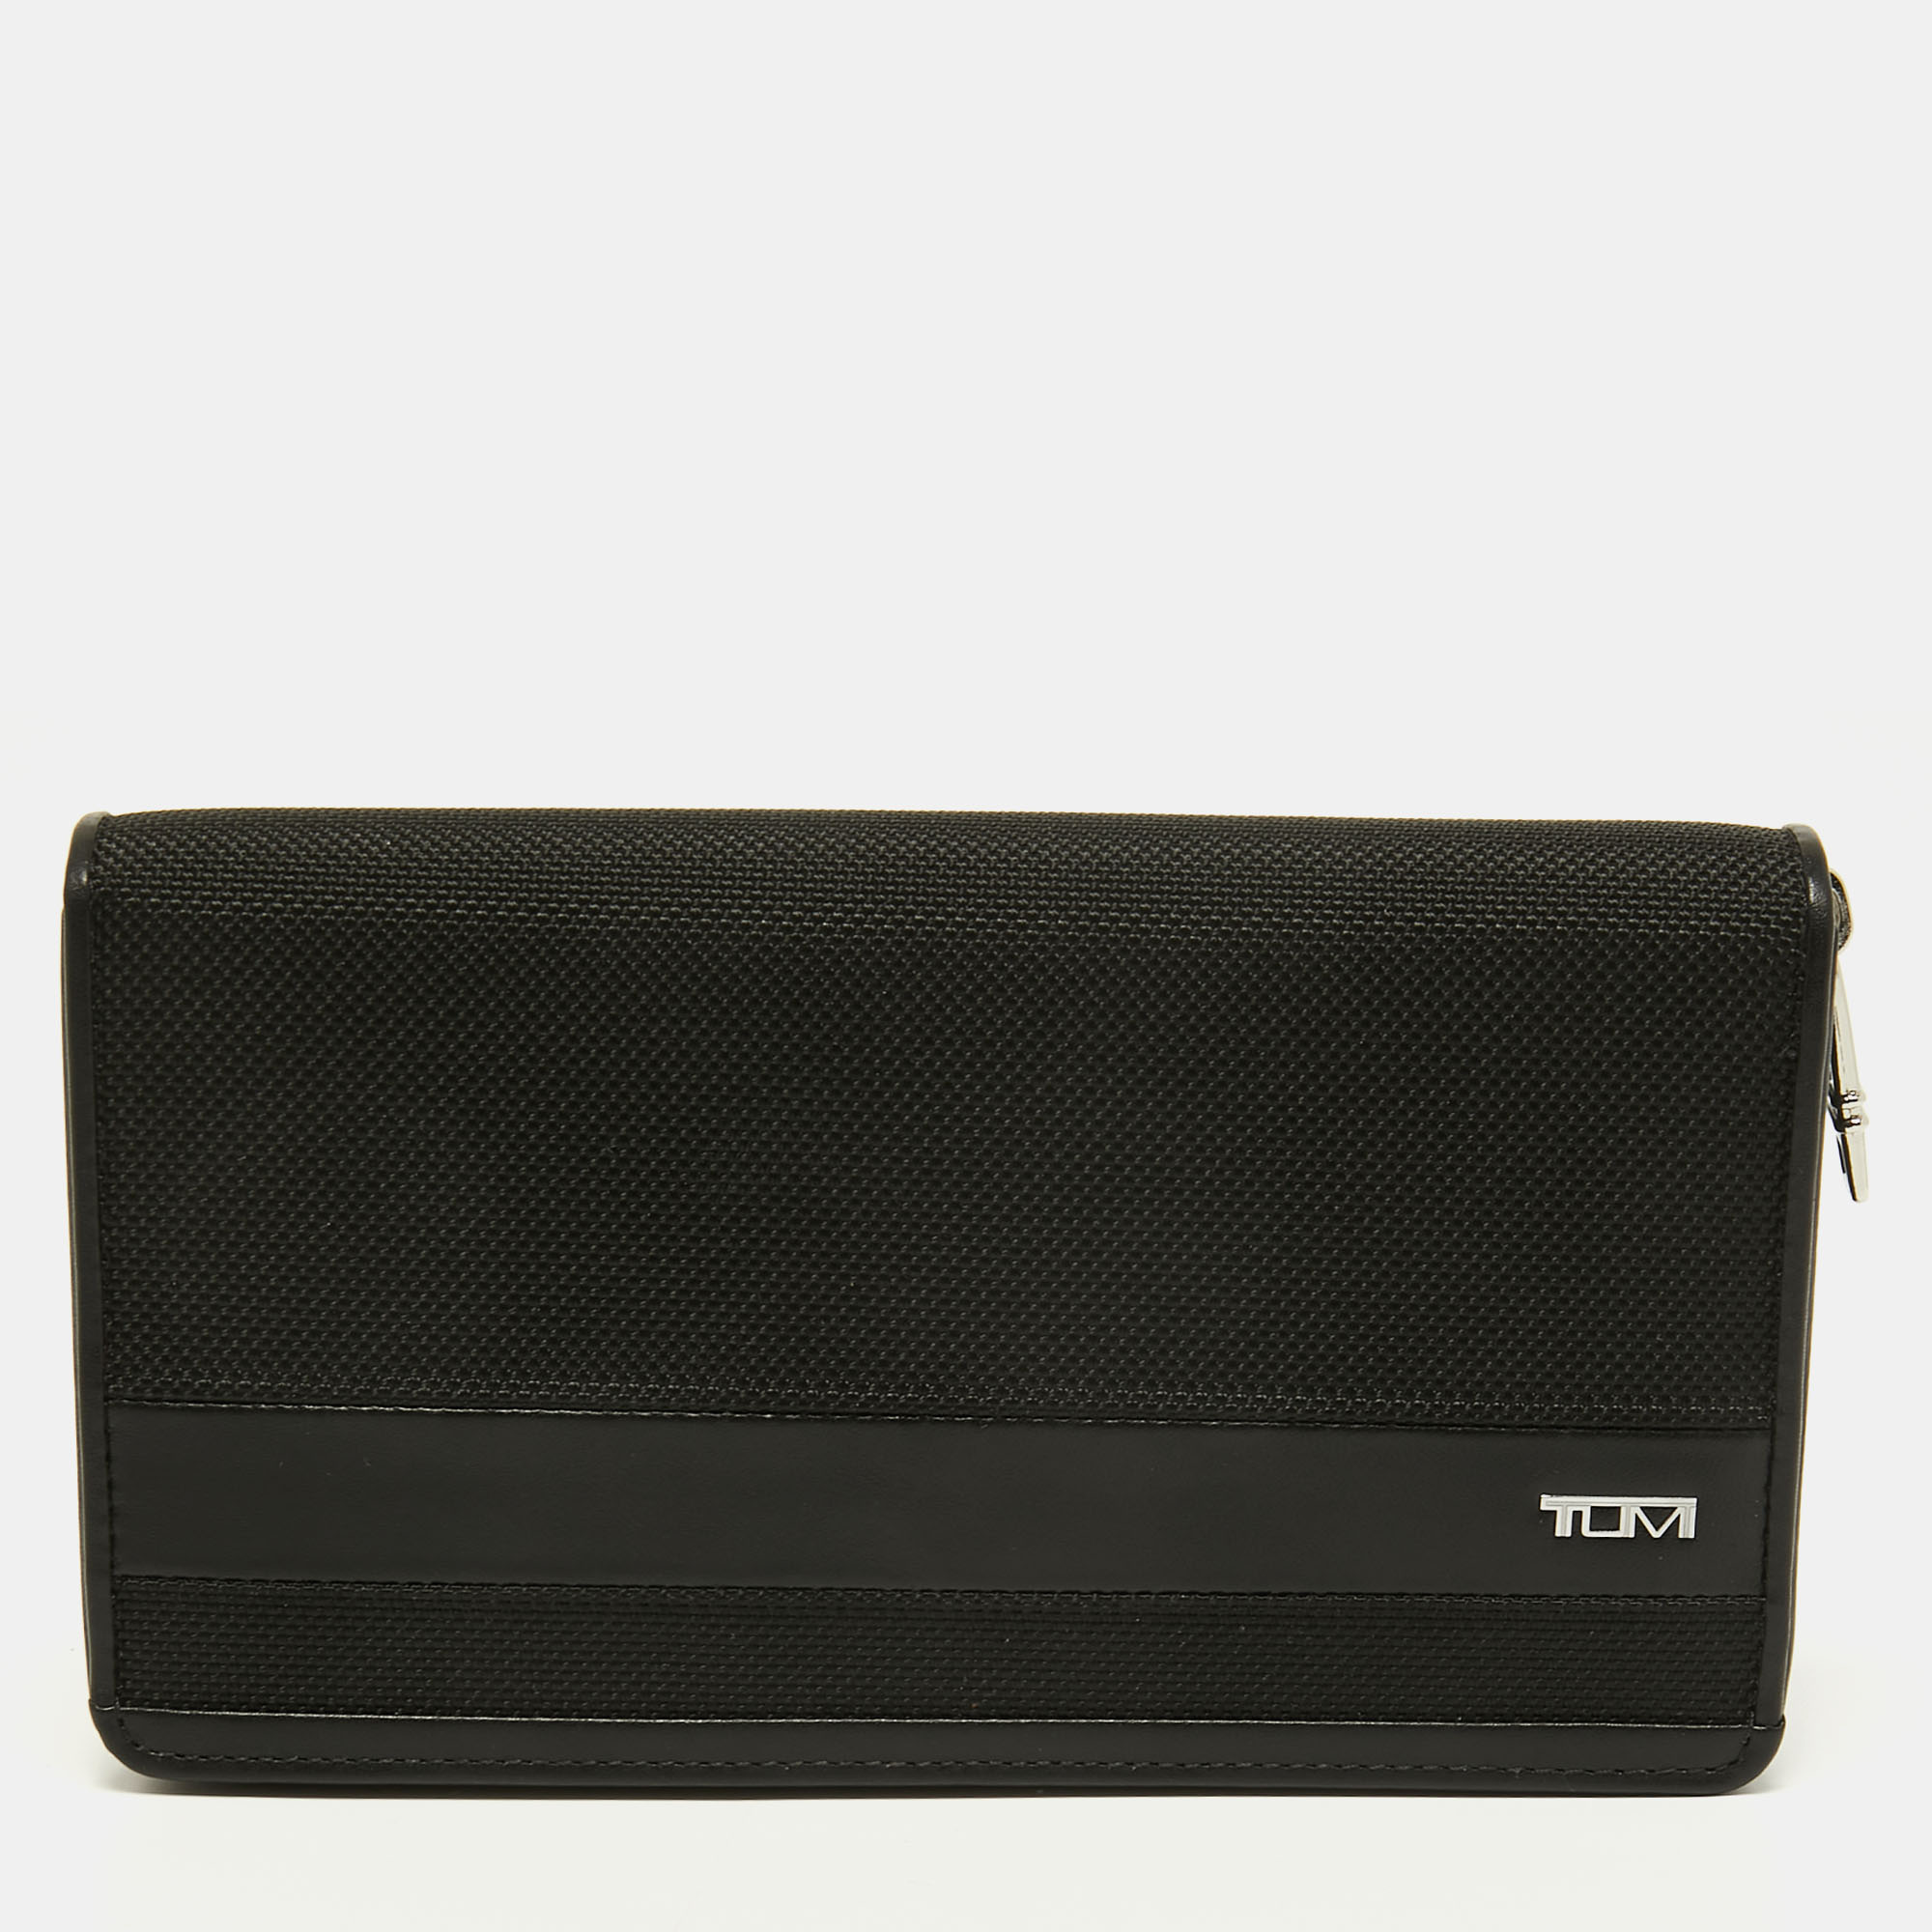 Pre-owned Tumi Black Nylon And Leather Travel Zip Around Wallet